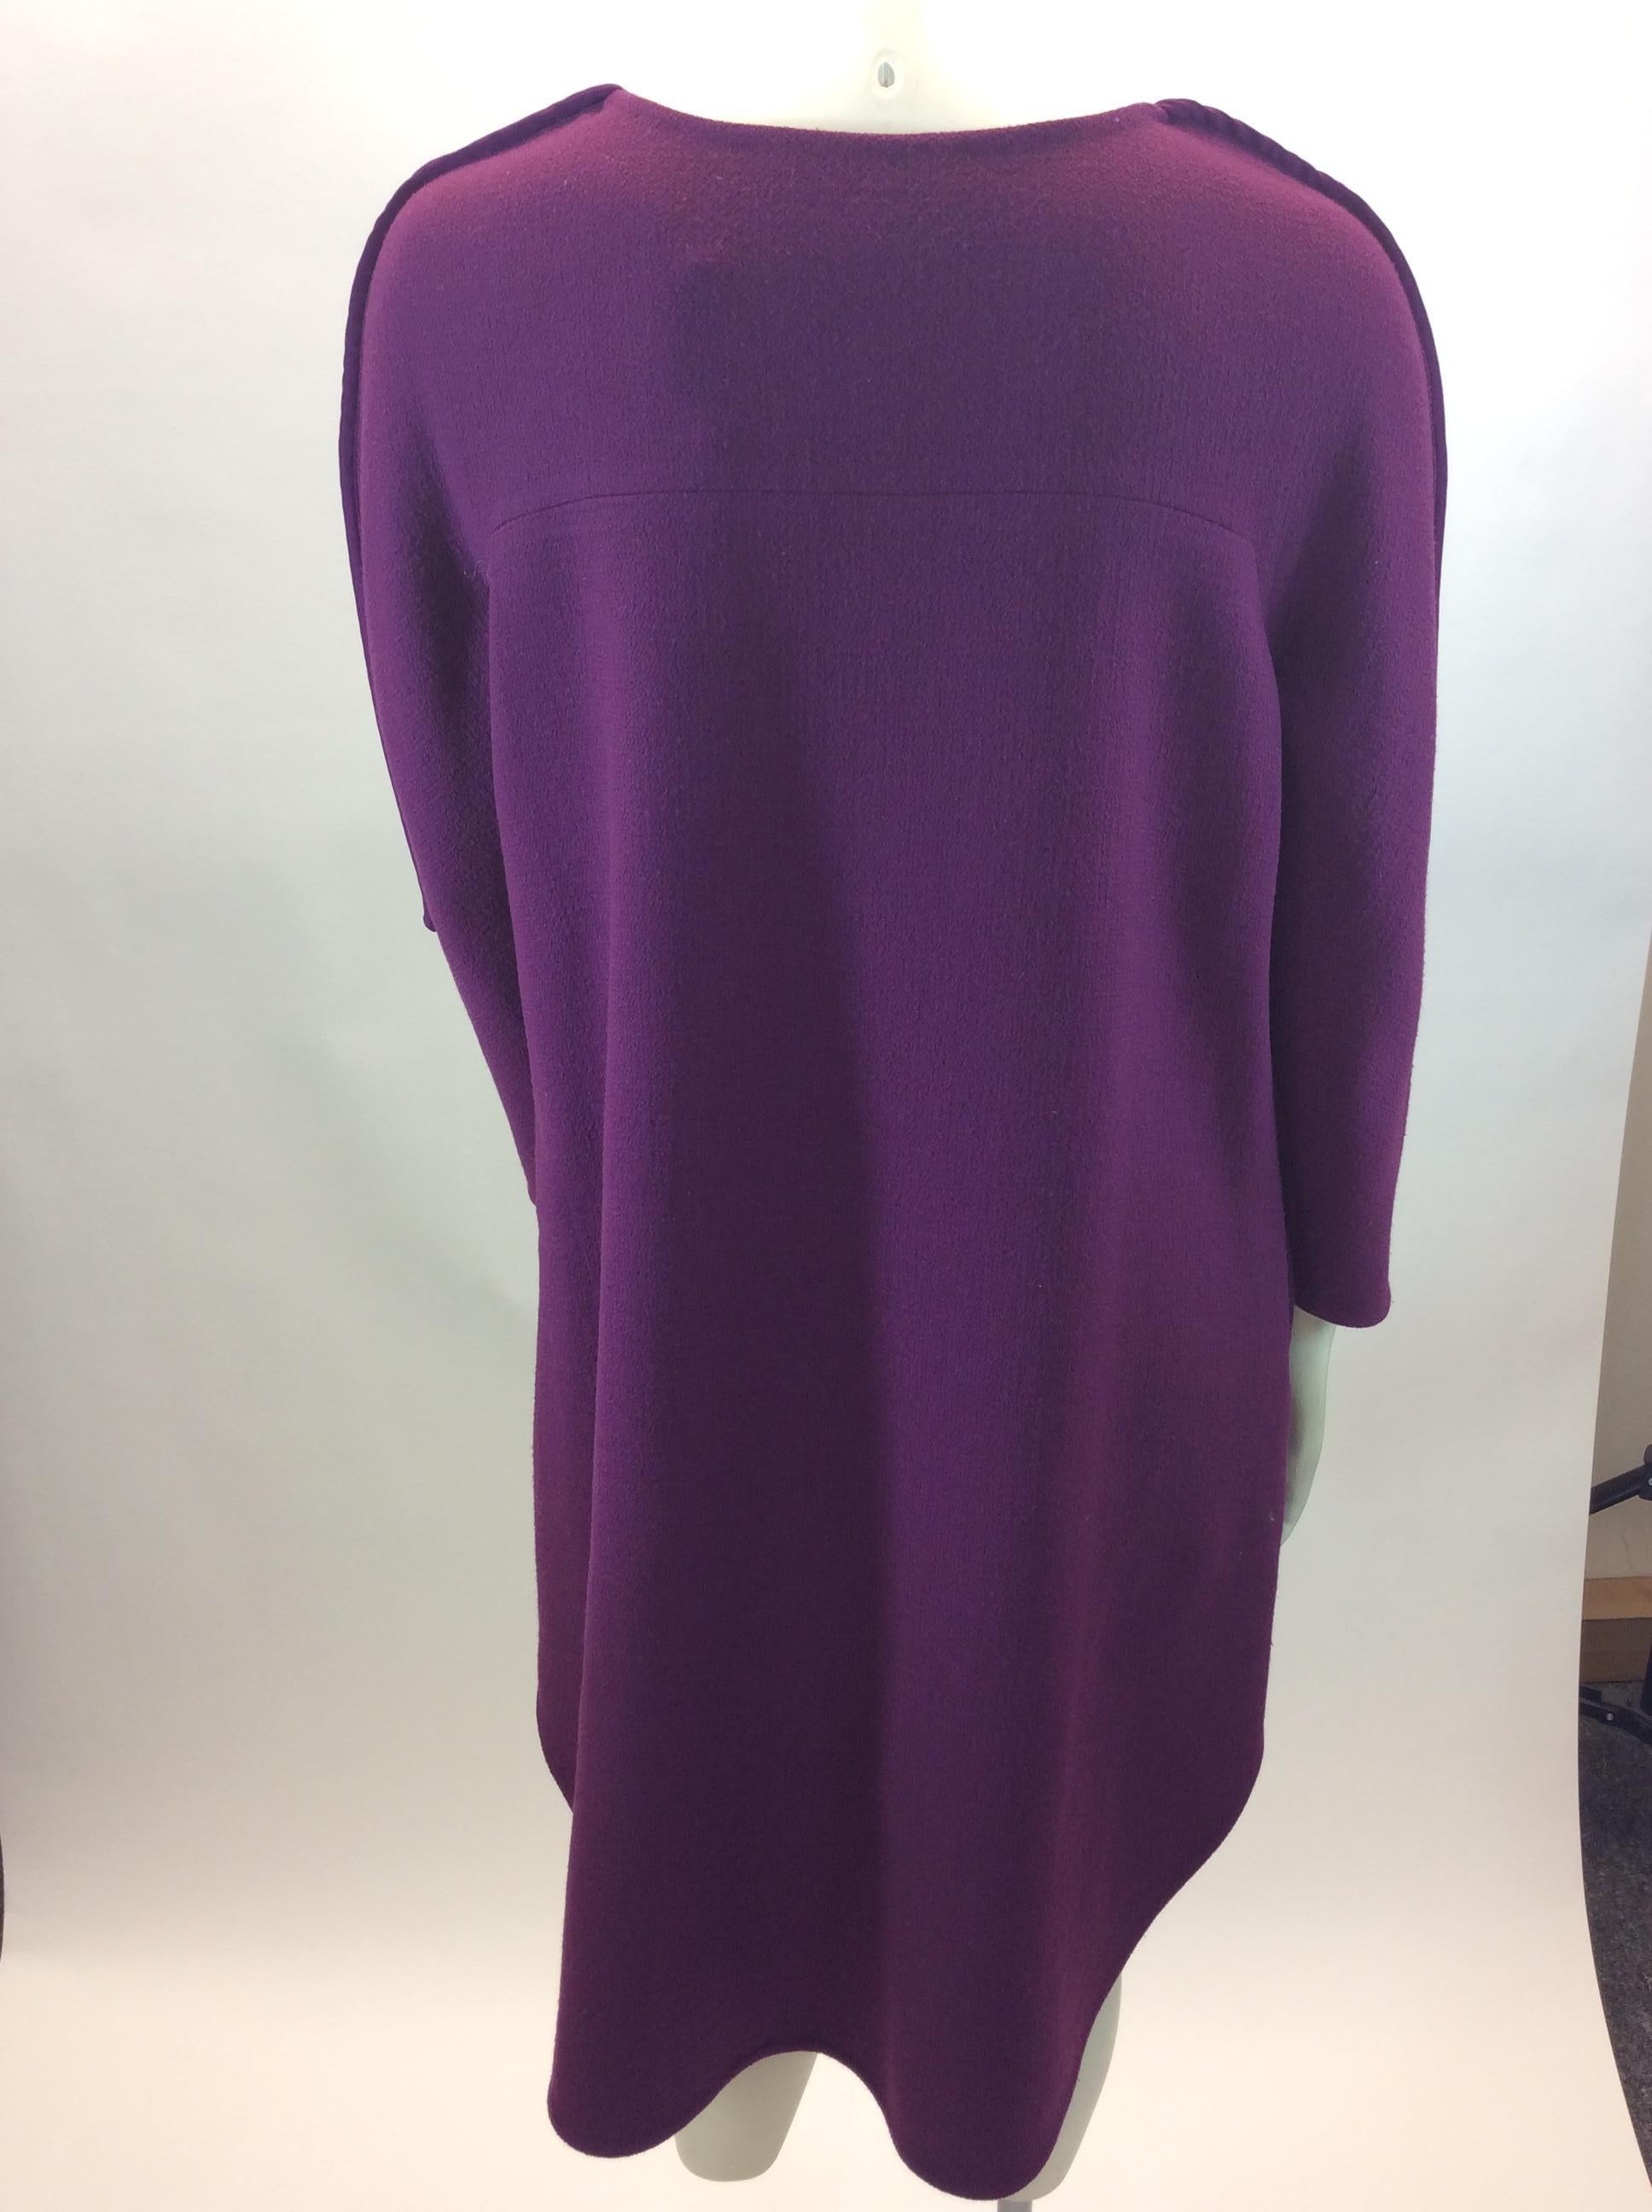 Phillip Lim Purple Wool Dress In Good Condition For Sale In Narberth, PA